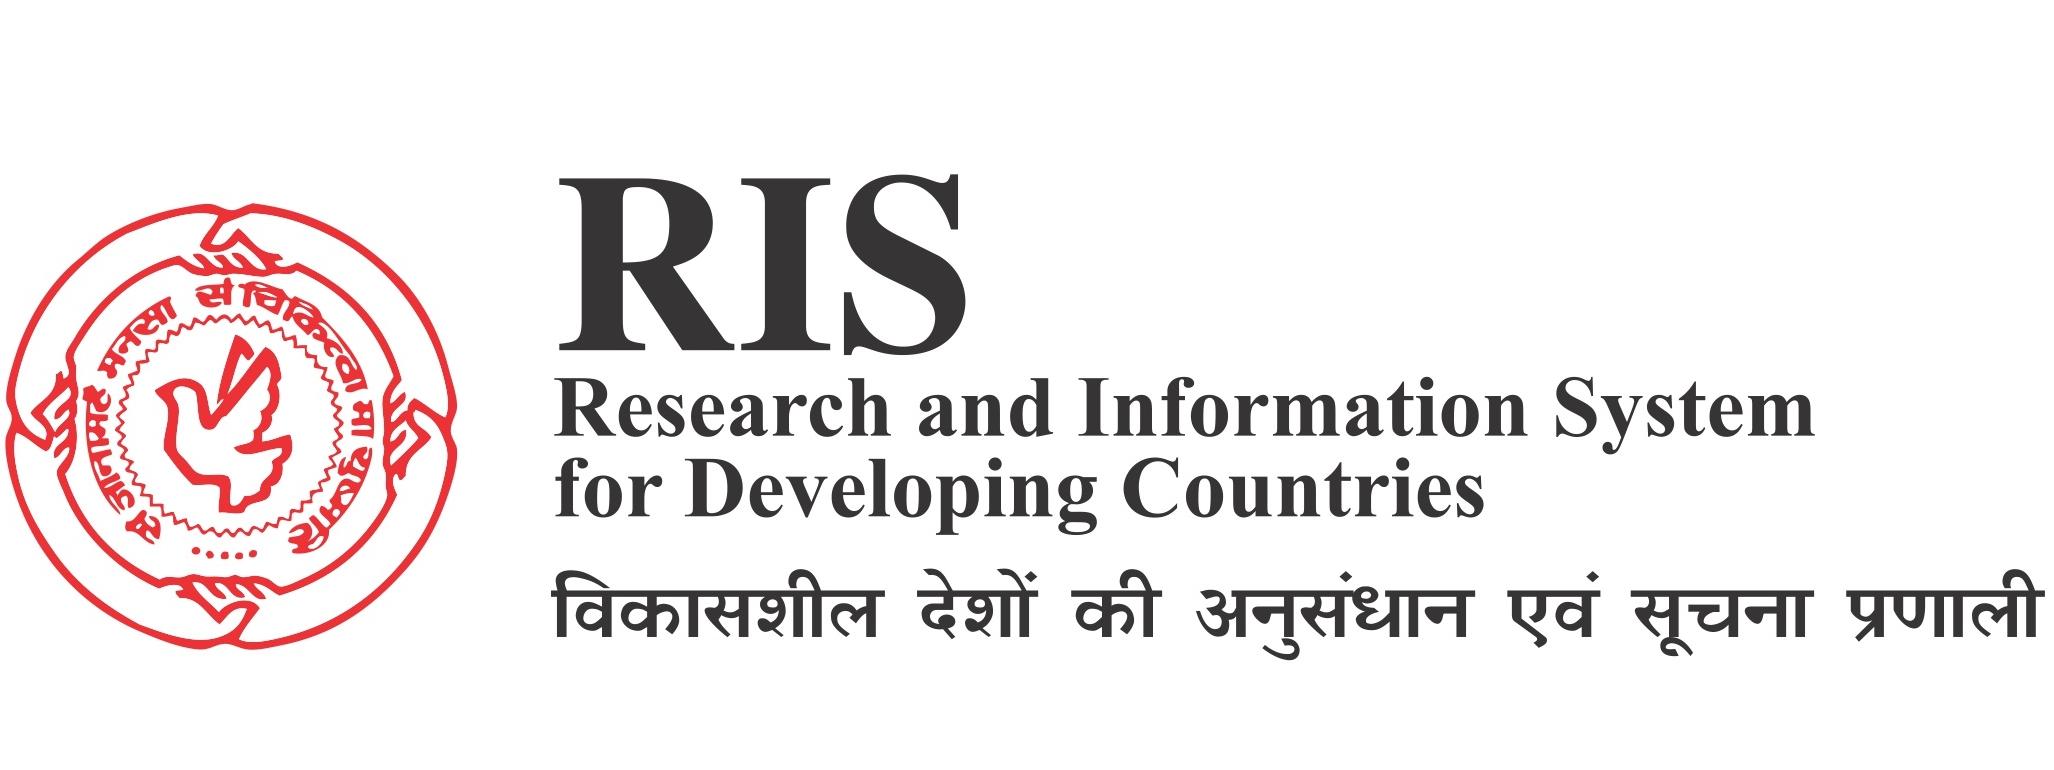 Logo: Research and Information System for Developing Countries (RIS) 